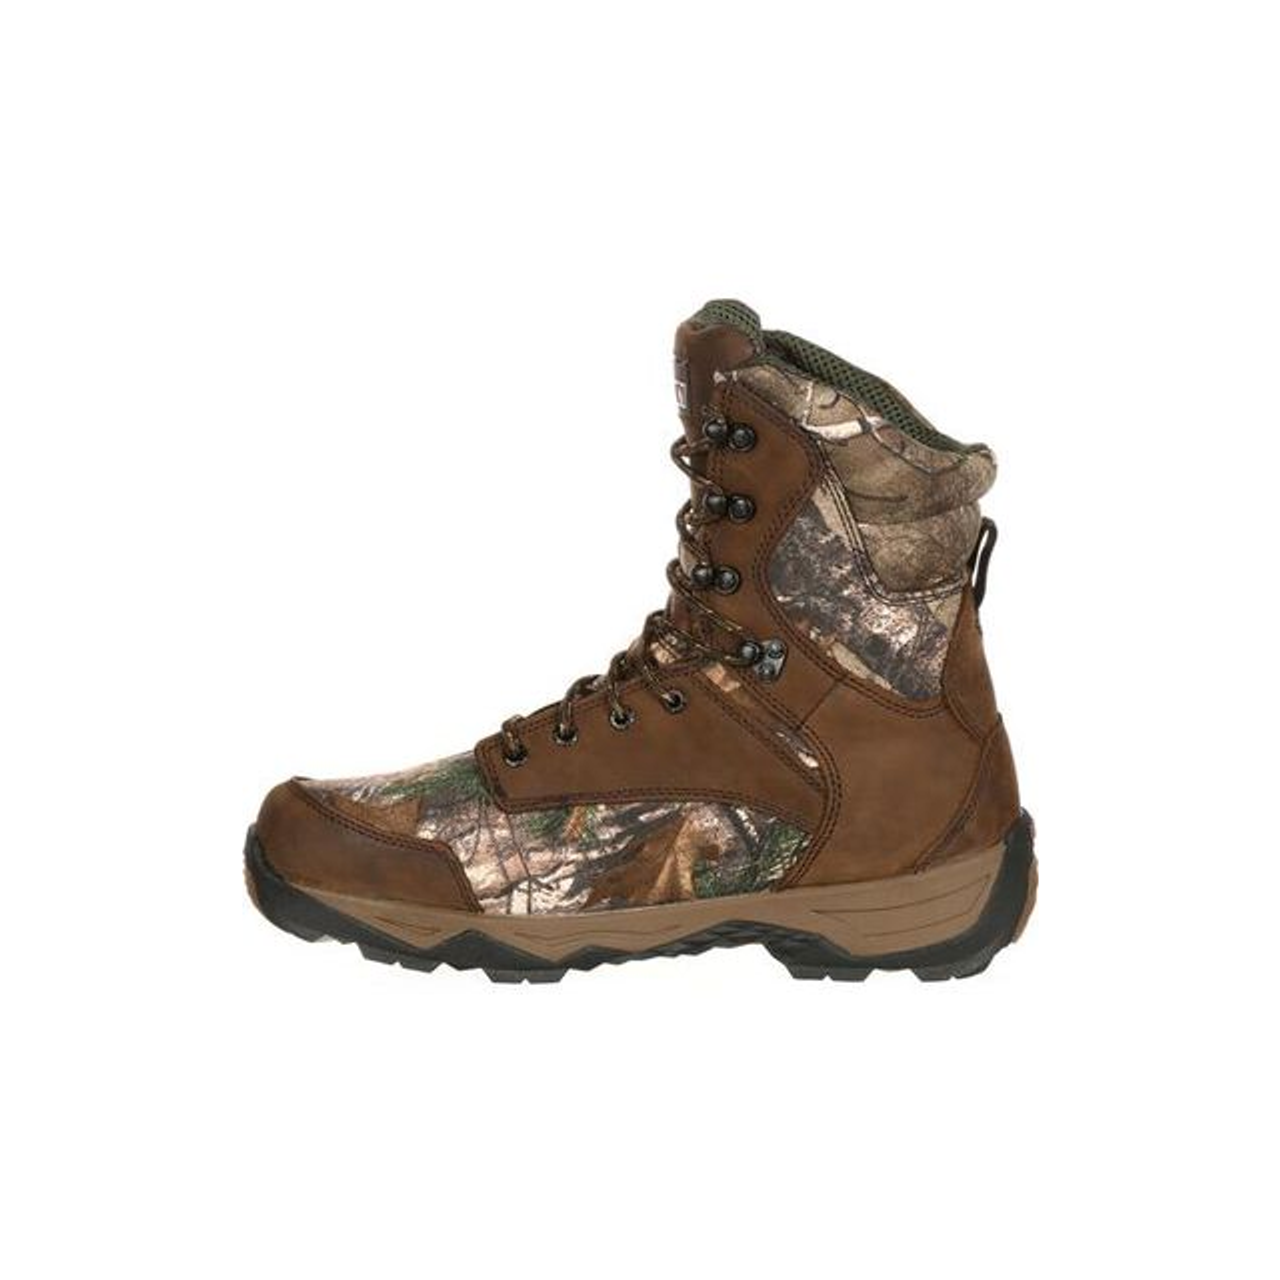 Rocky - Men's - Retraction Waterproof 800G Insulated Outdoor Boot with 8in height in Realtree Extra Camo pattern, Style RKS0227